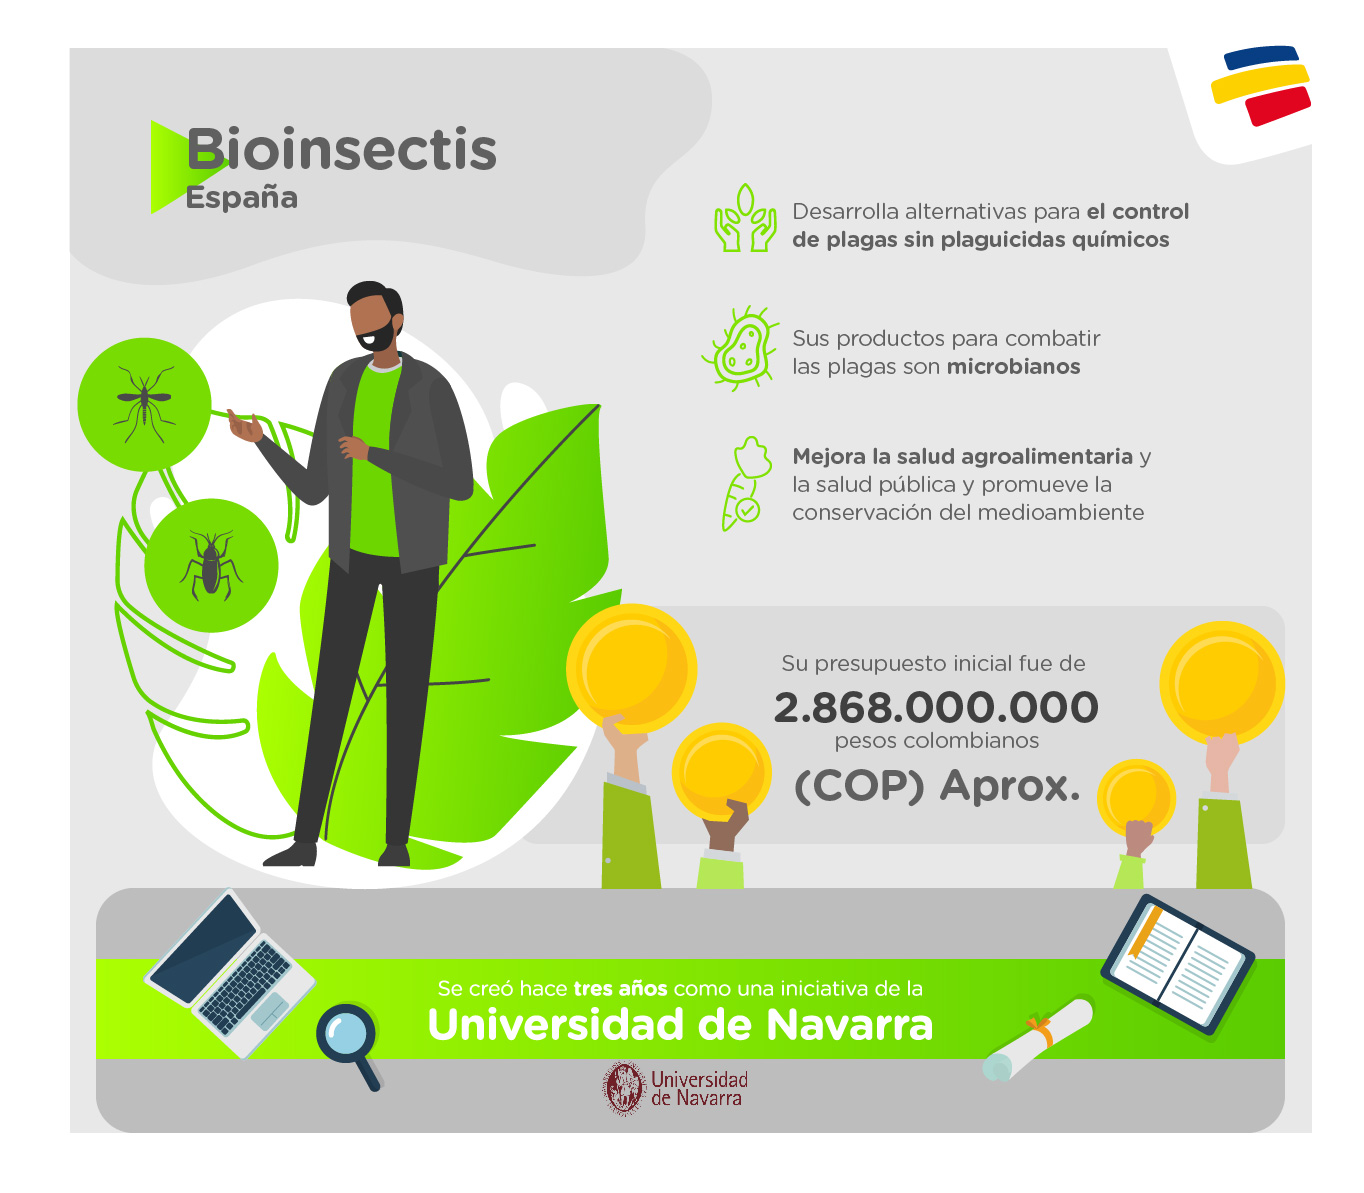 Bioinsectis